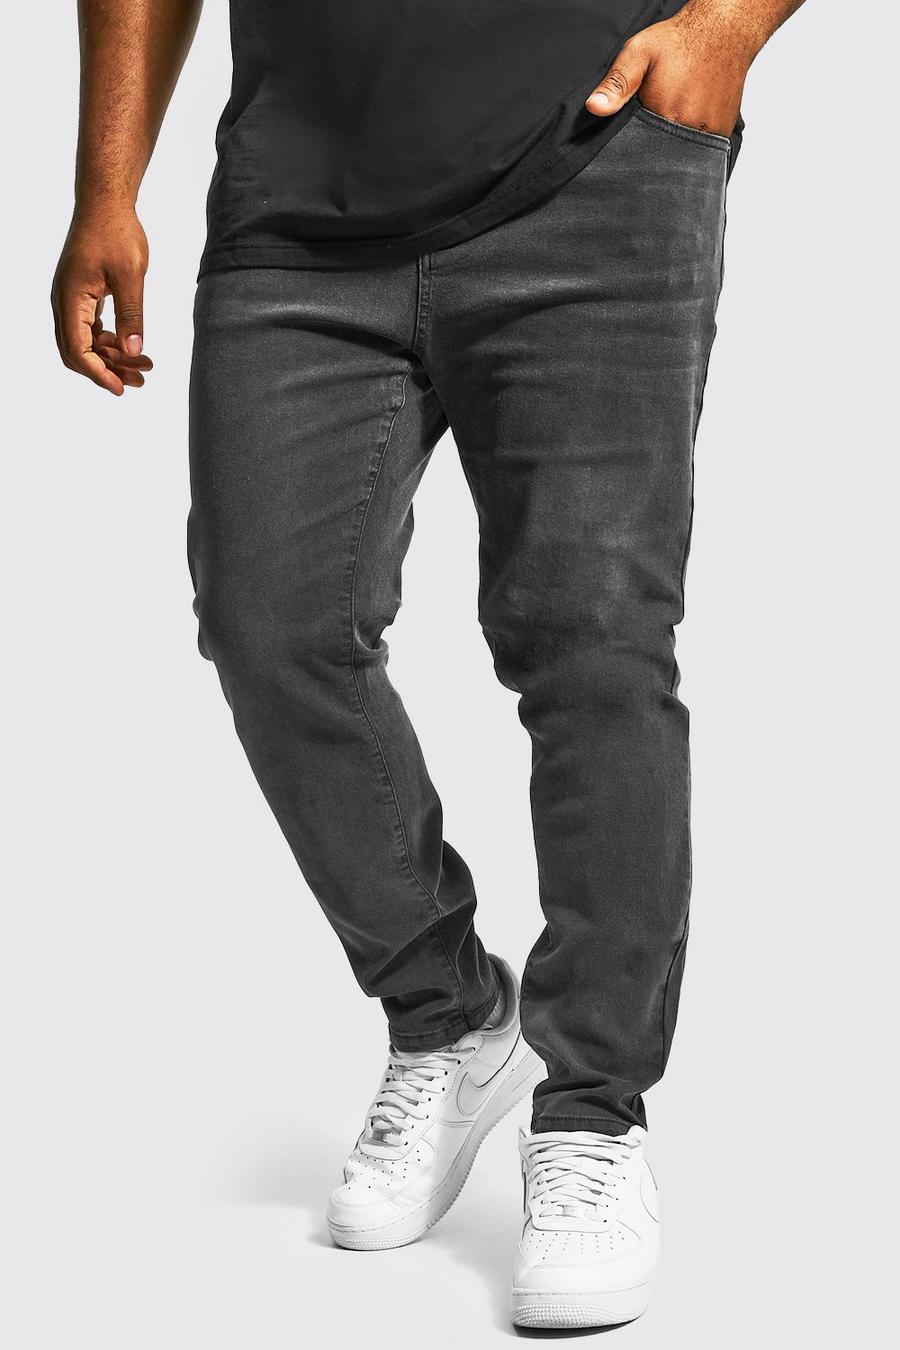 Jeans Plus Size Skinny Fit in Stretch in poliestere riciclato, Charcoal gris image number 1